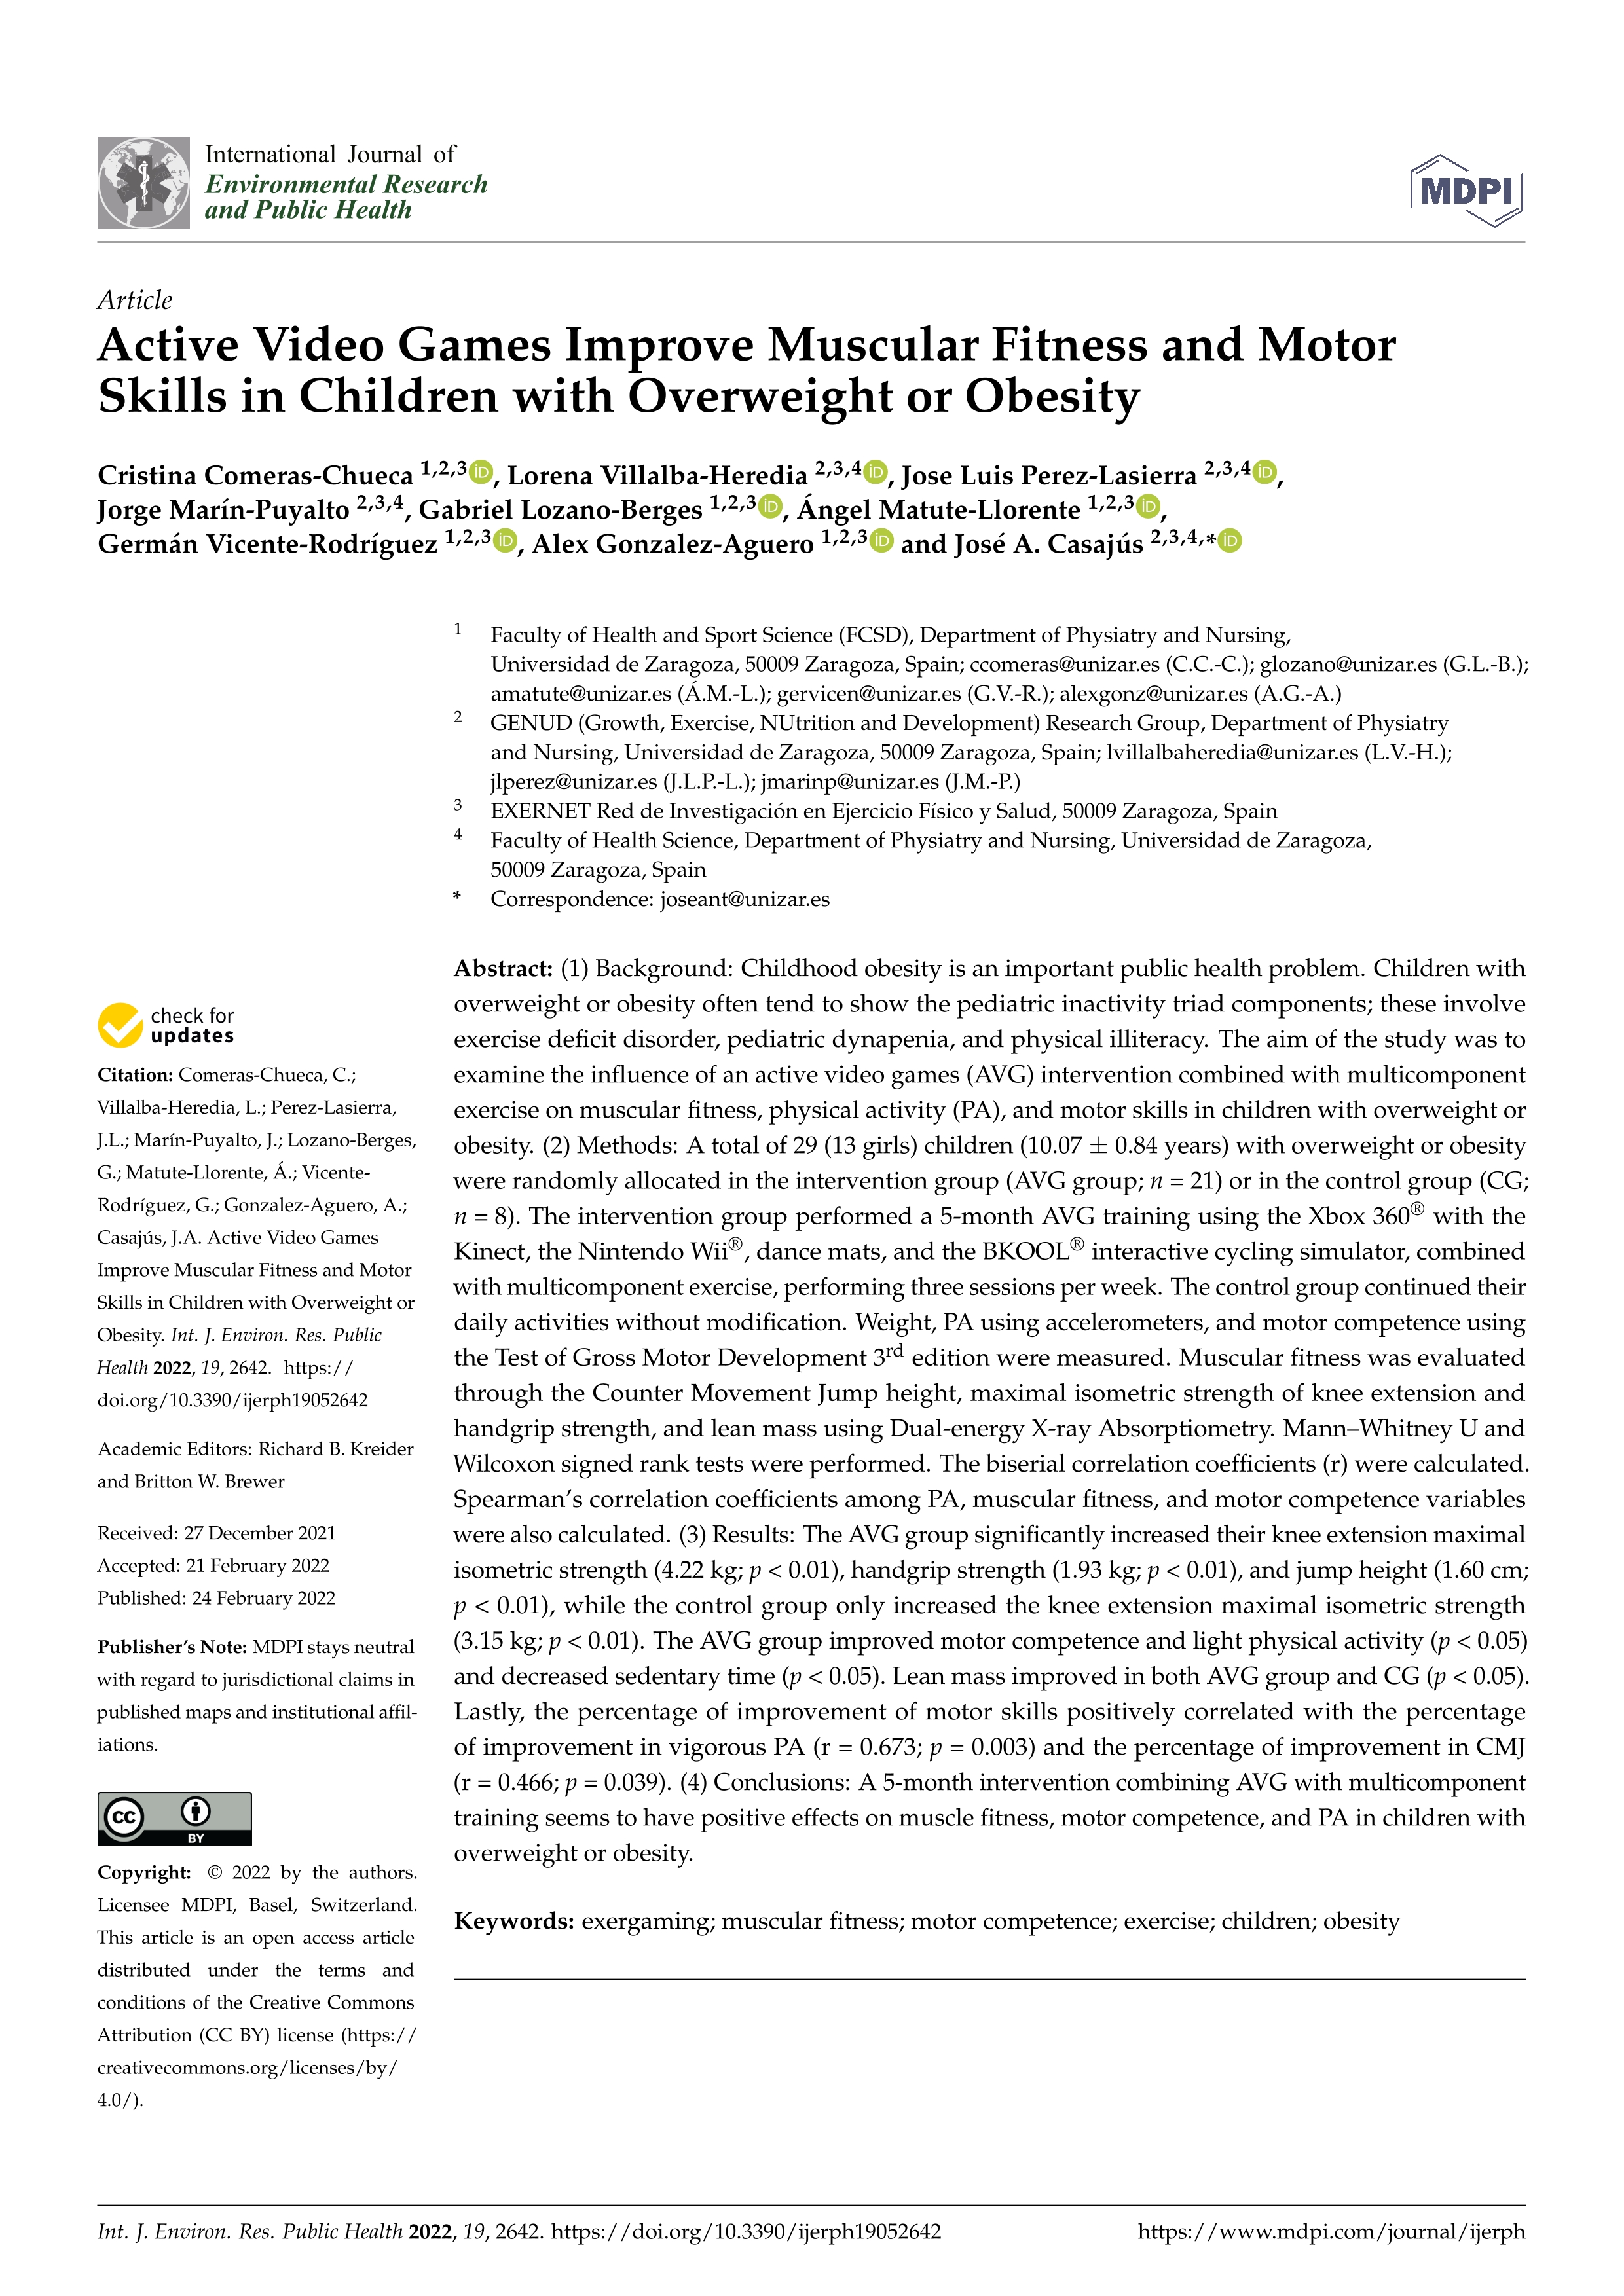 Active video games improve muscular fitness and motor skills in children with overweight or obesity